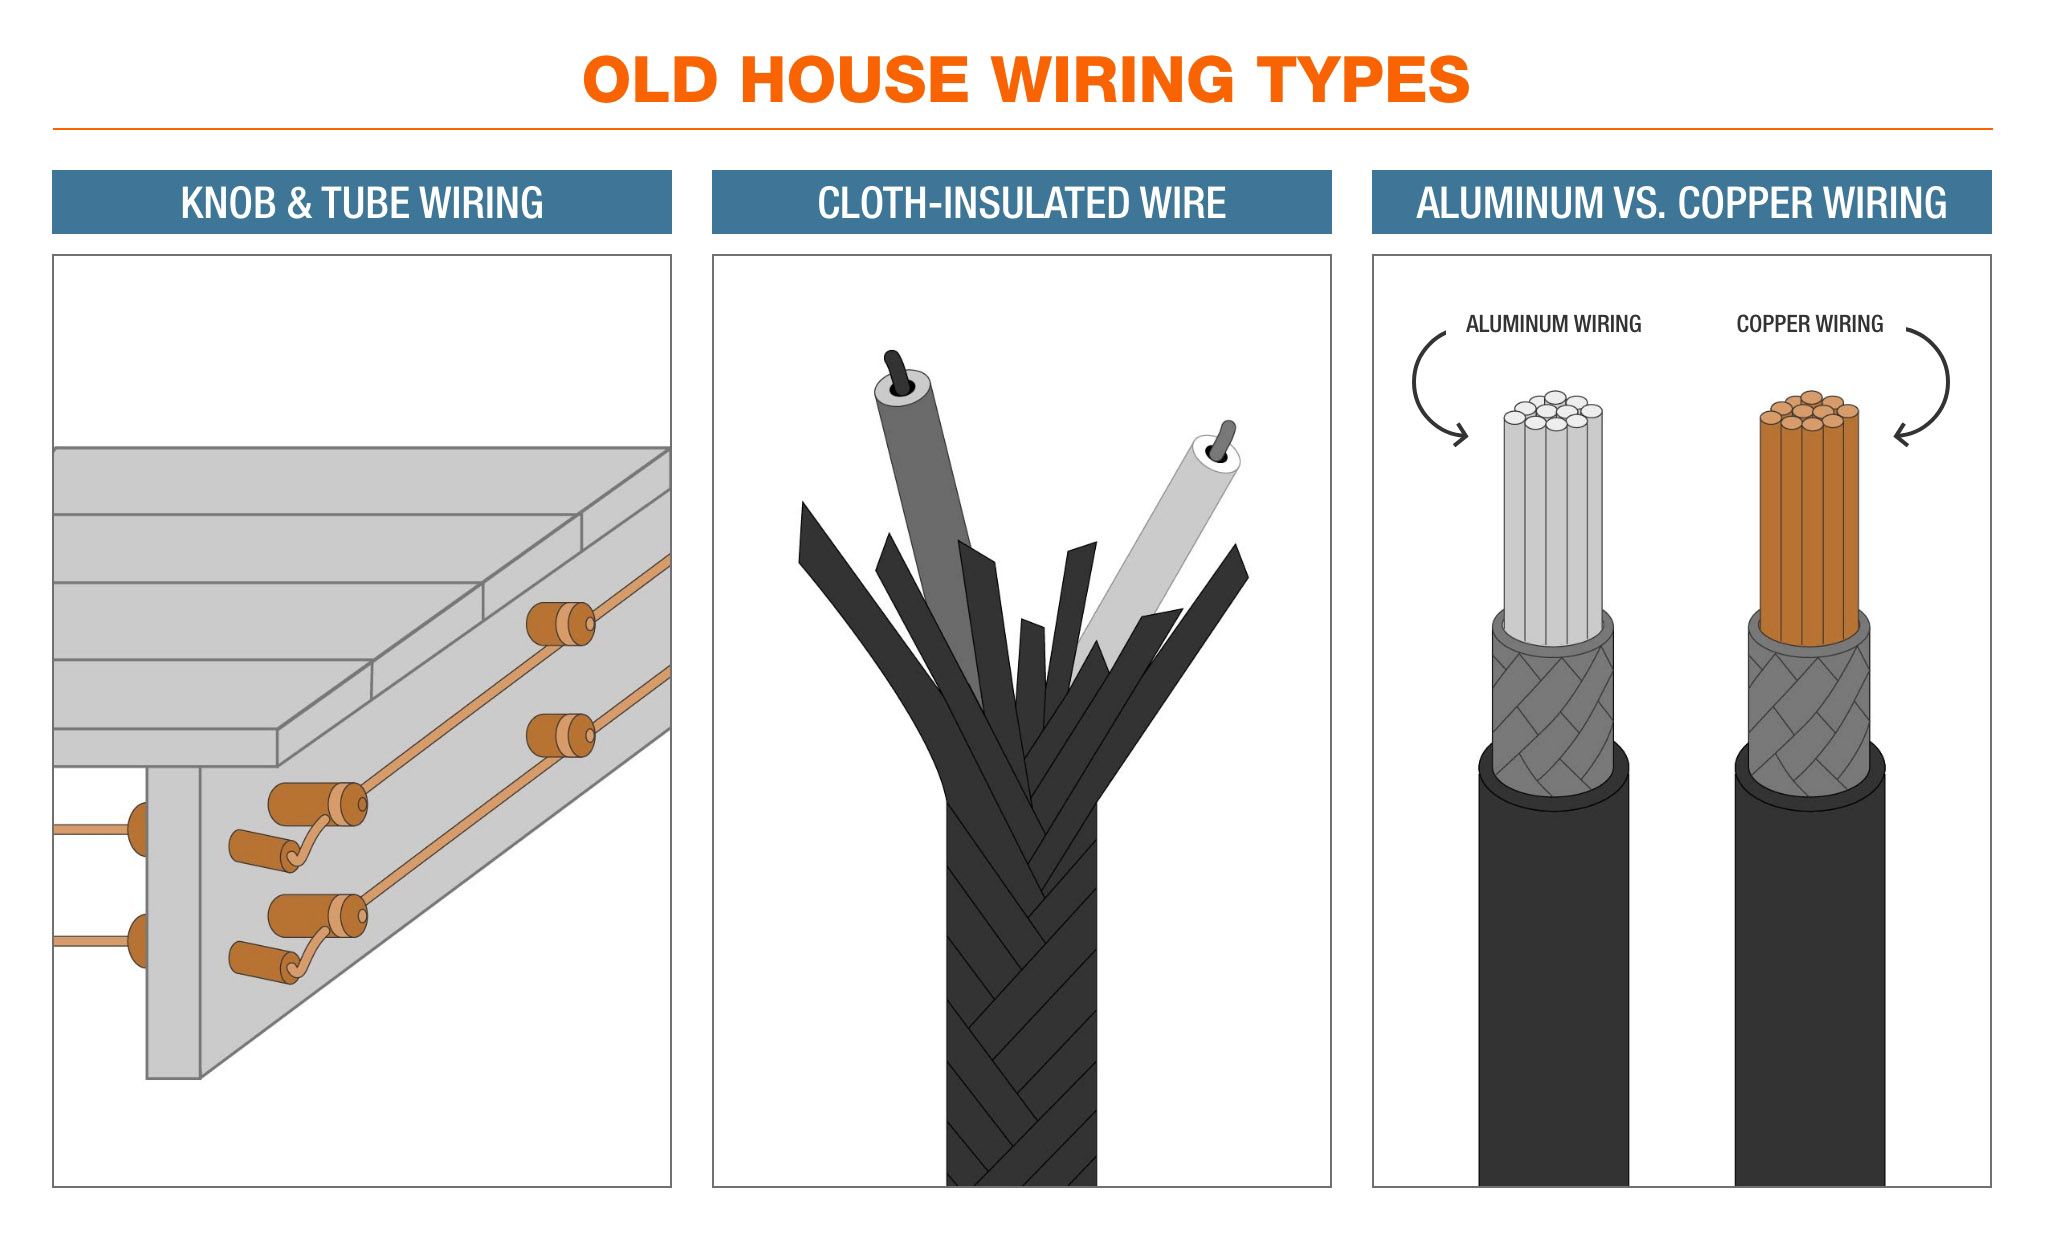 A graphic shows old house wiring types.